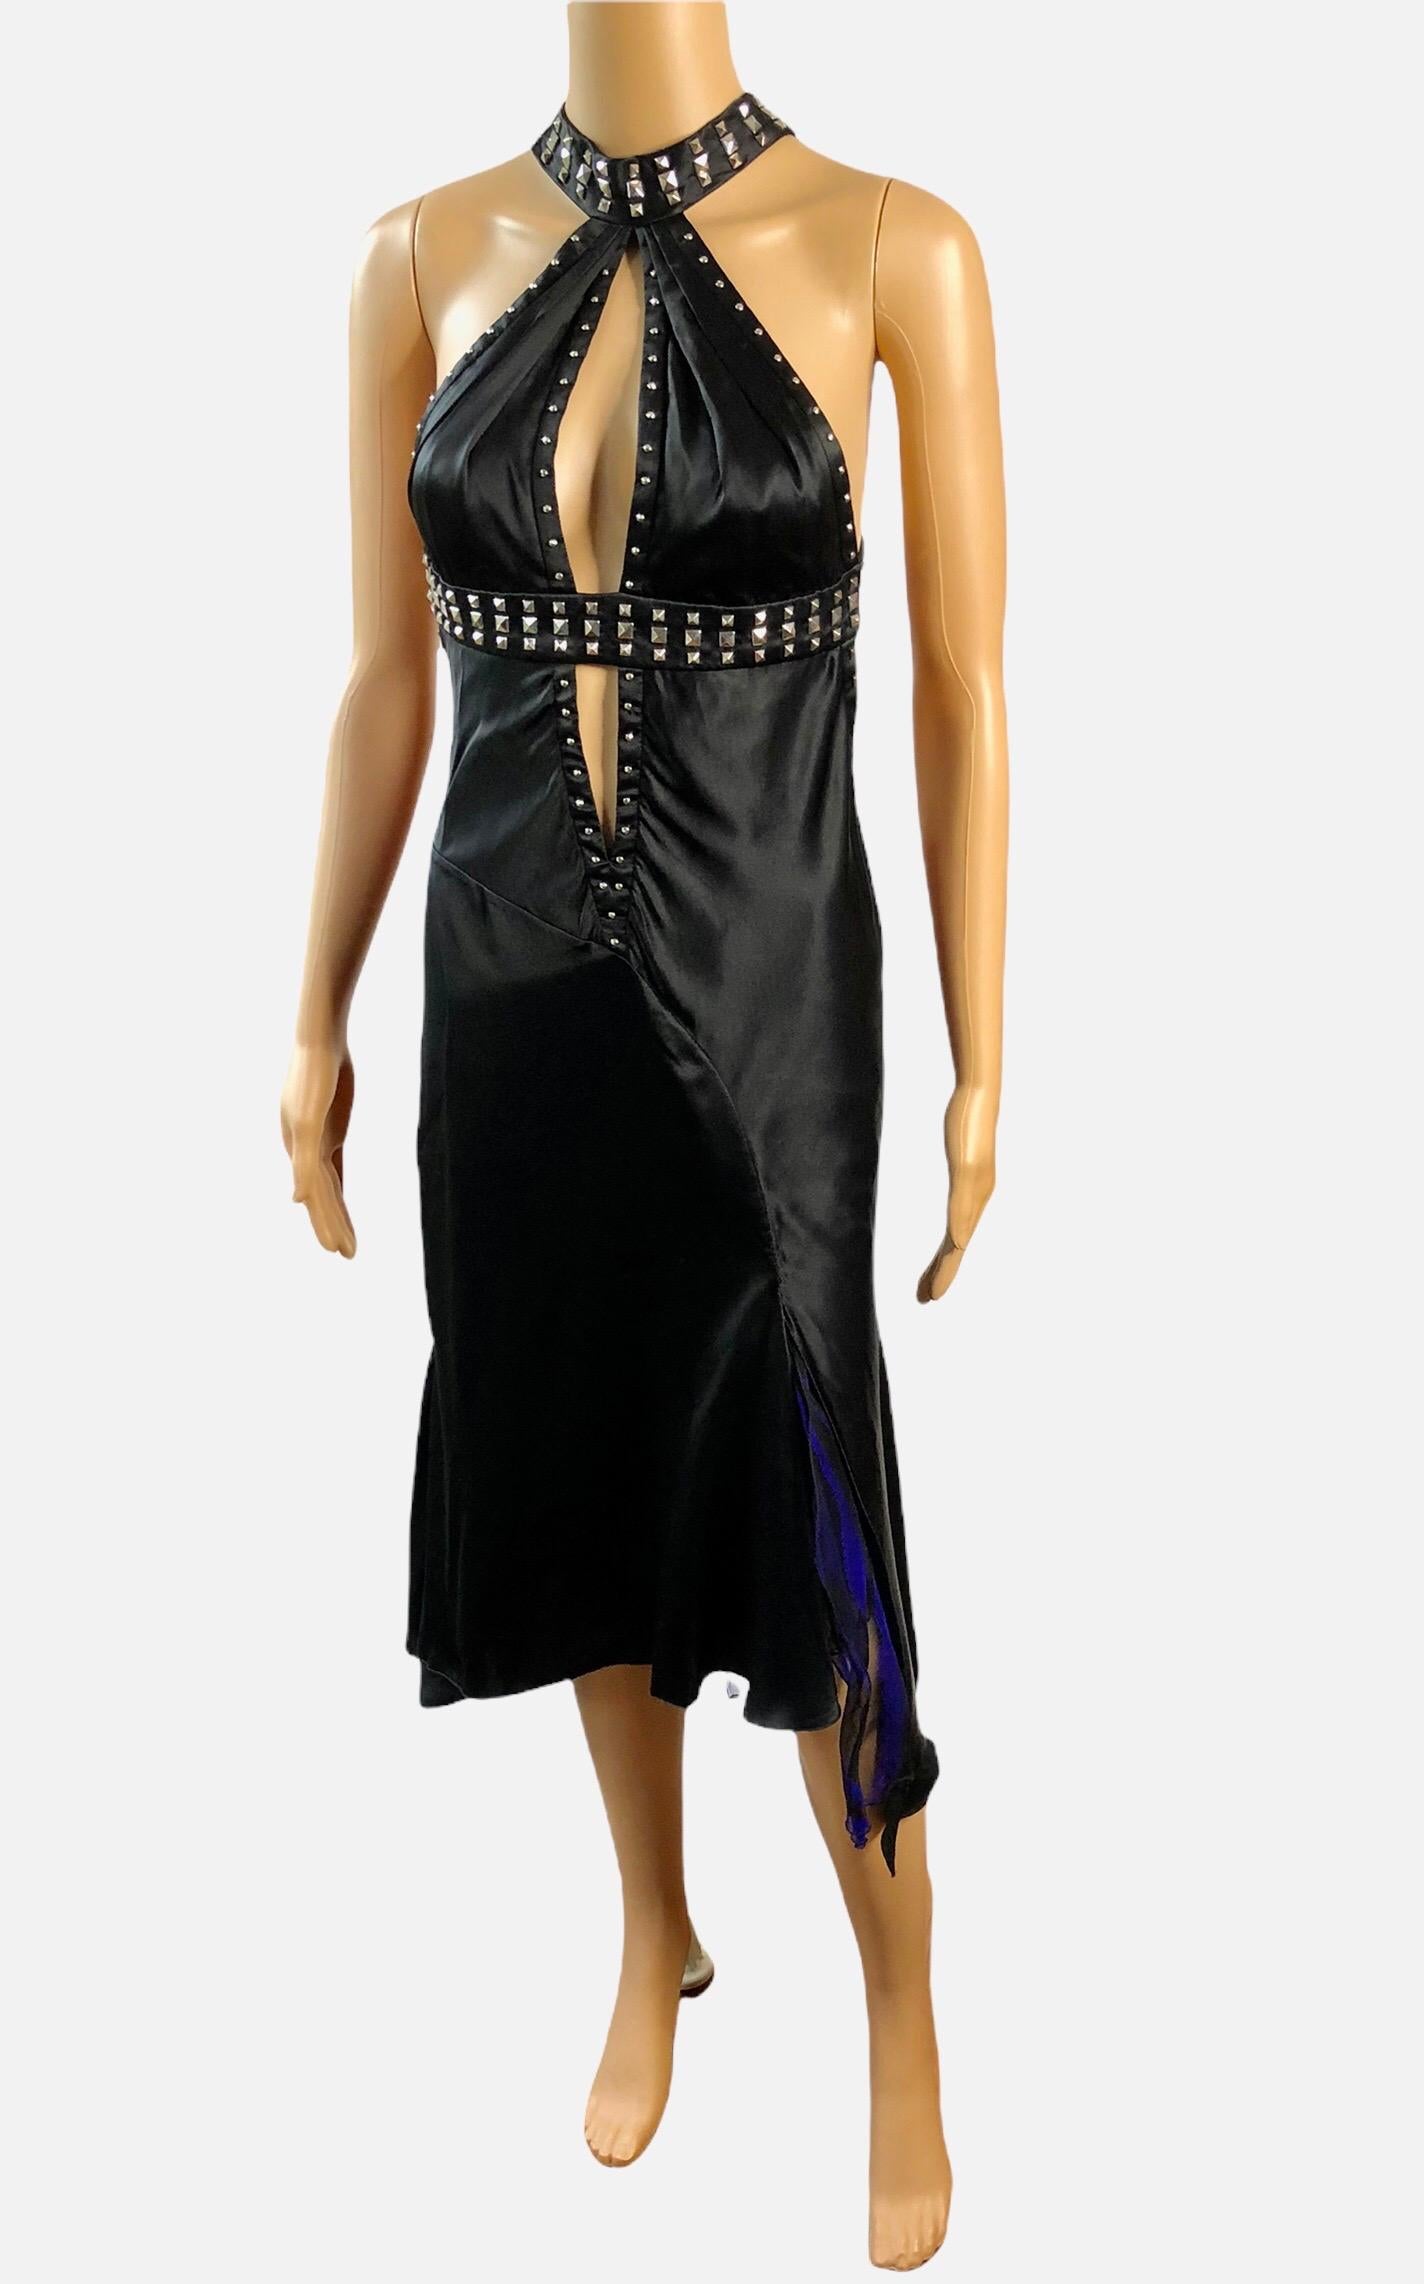 Versace F/W 2004 Embellished Studded Plunging Keyhole Neckline Open Back Dress In Good Condition For Sale In Naples, FL